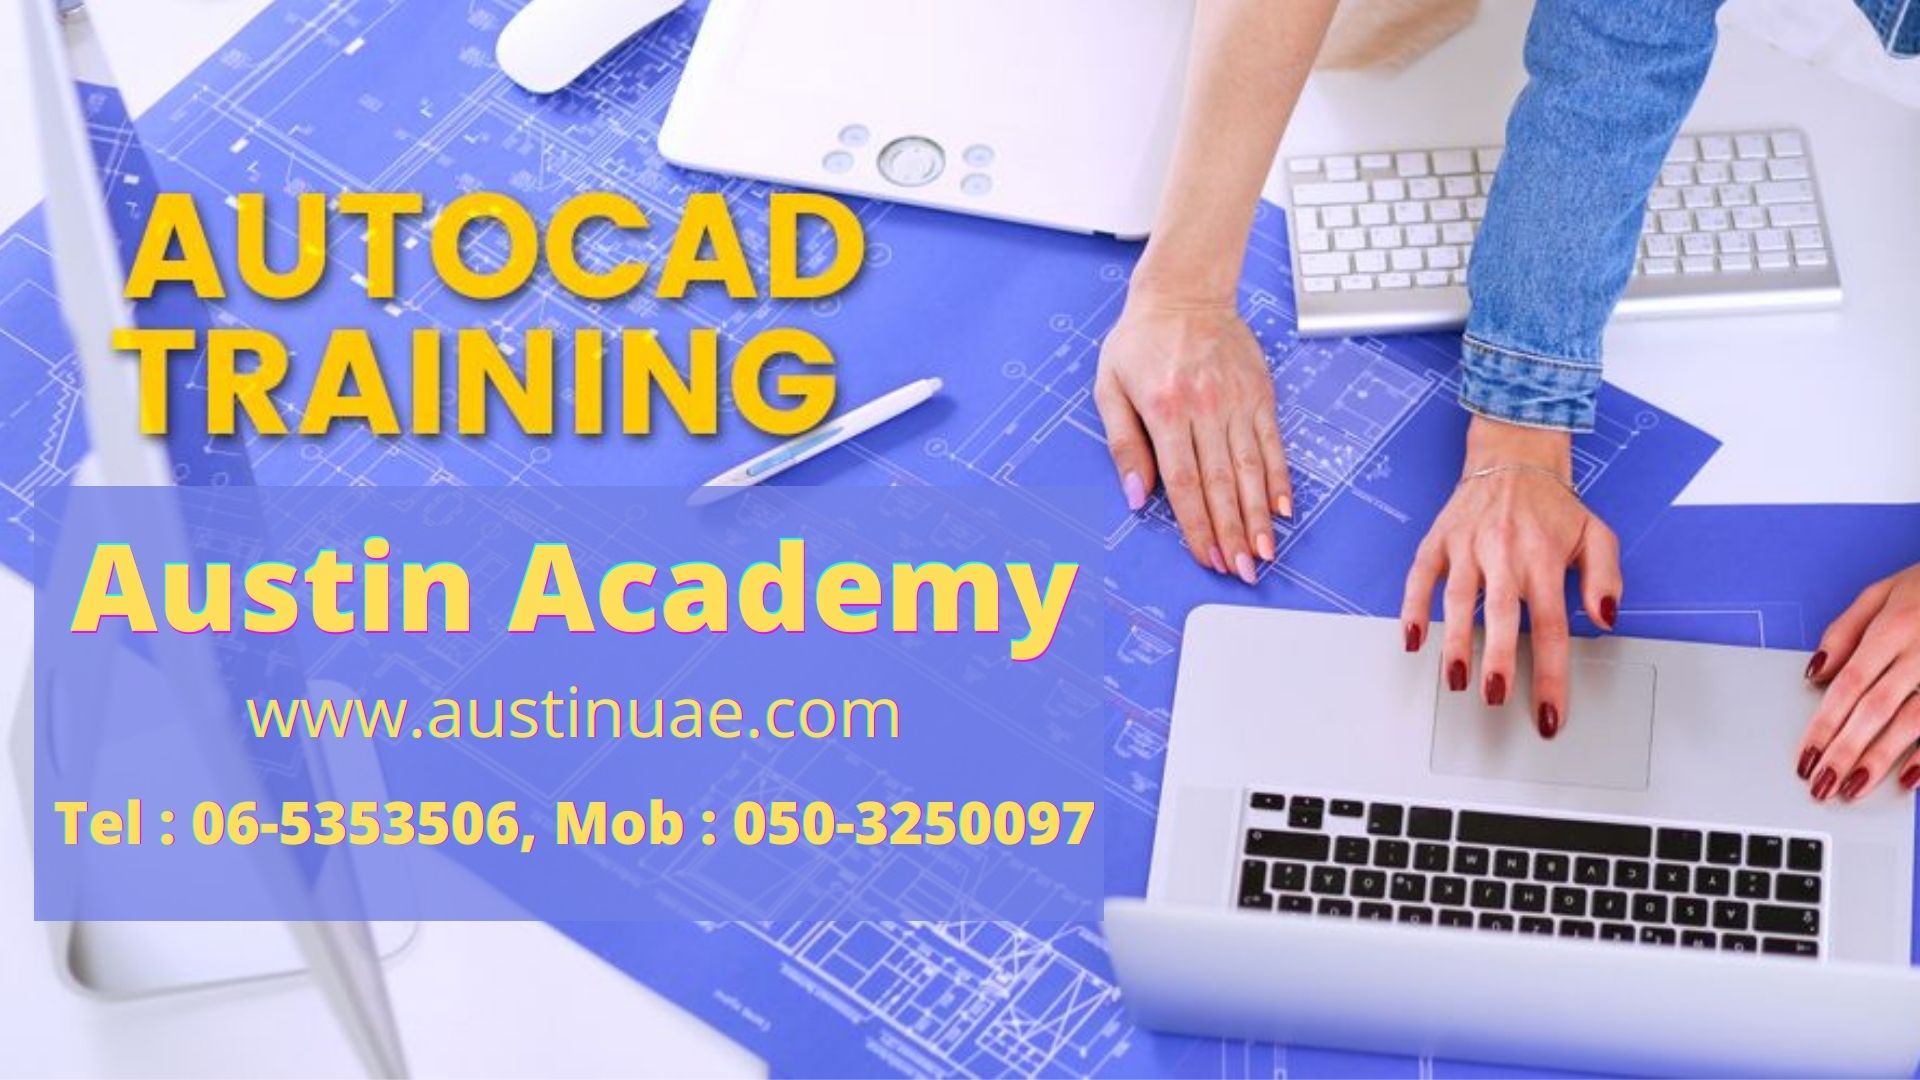 Autocad Training In Sharjah With Best Price Call 0503250097